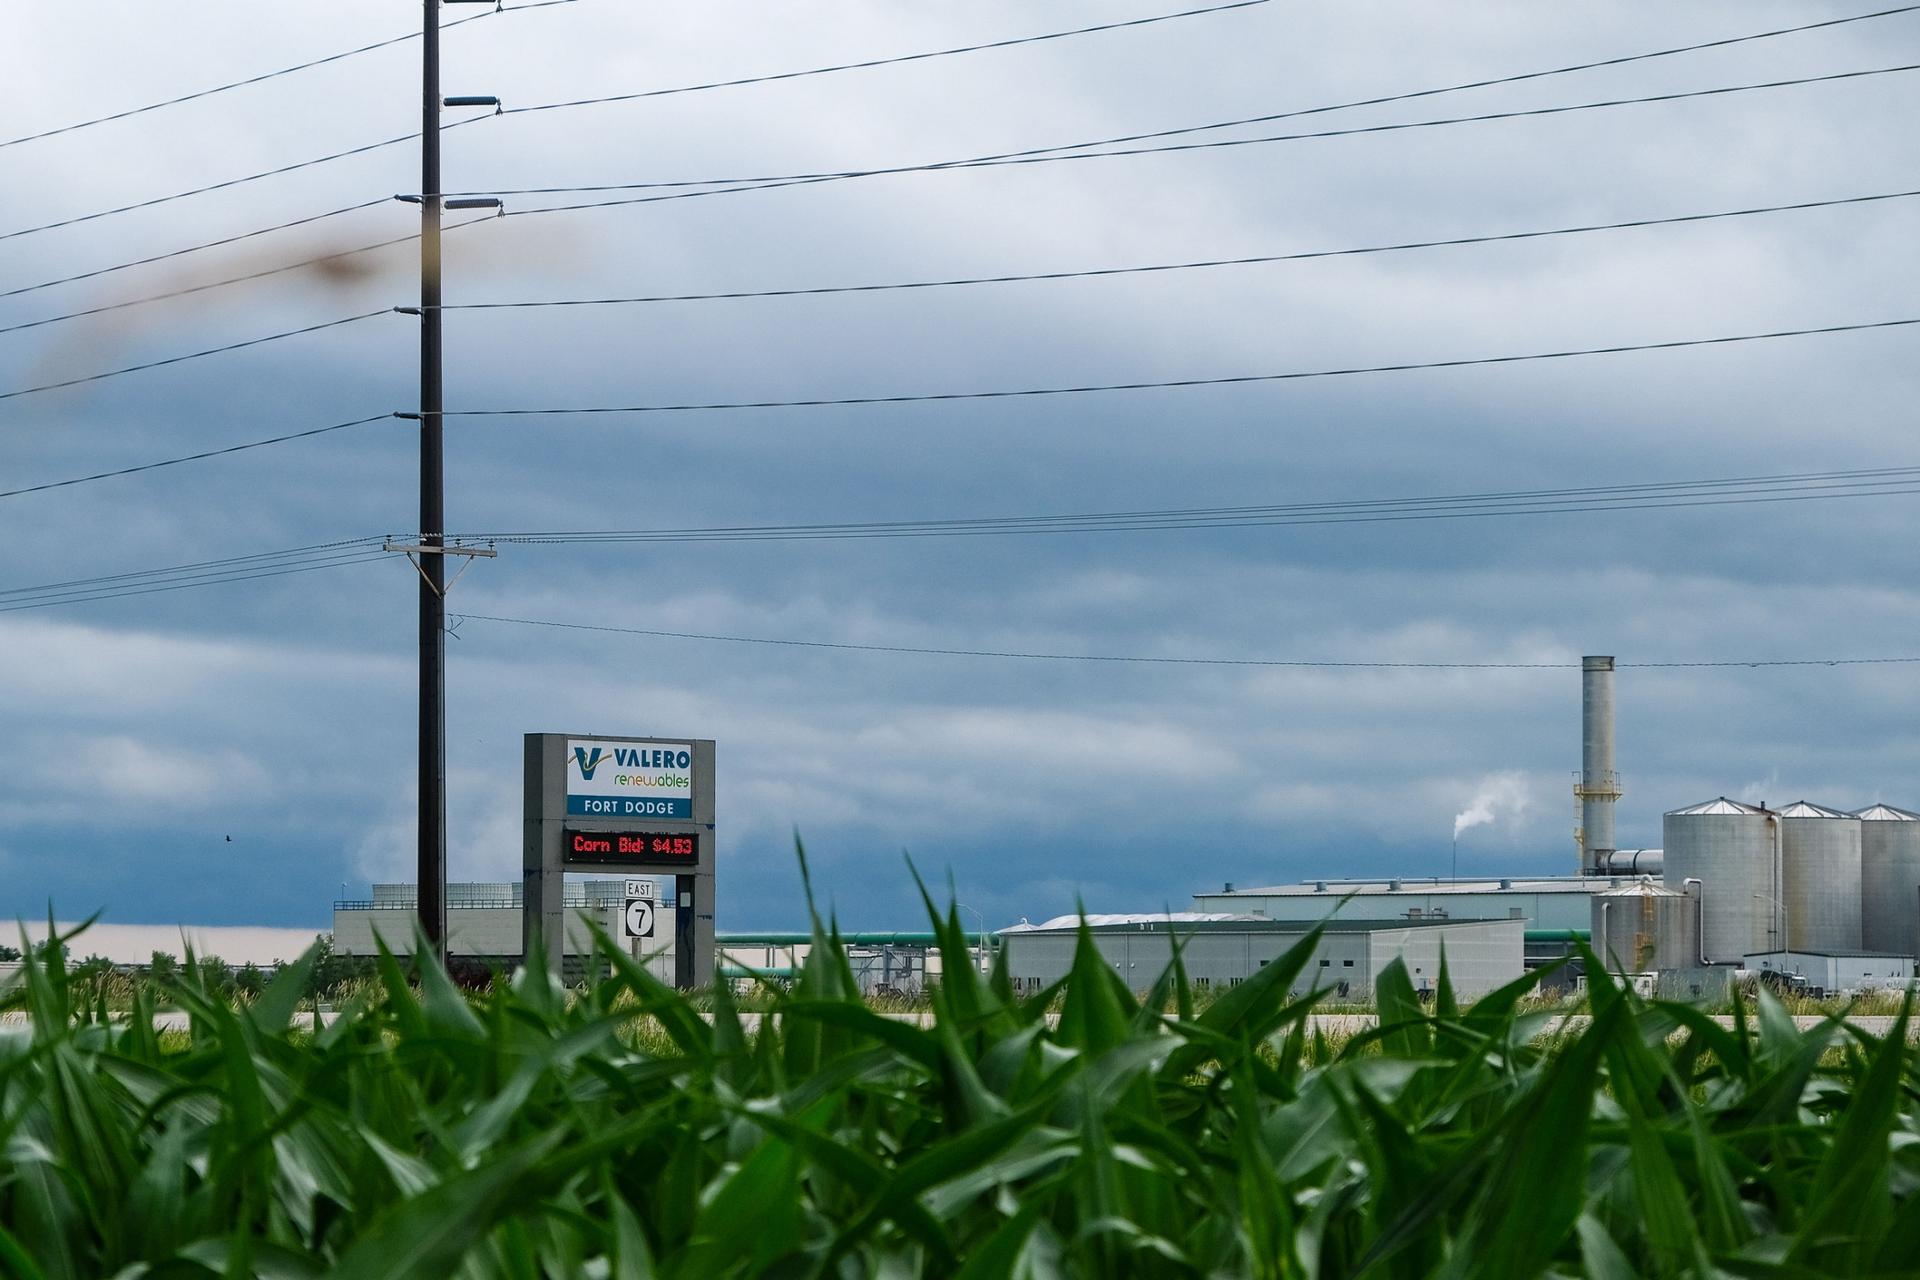 Young green corn is seen in the nearground with a sign for Valero ethanol in the background.